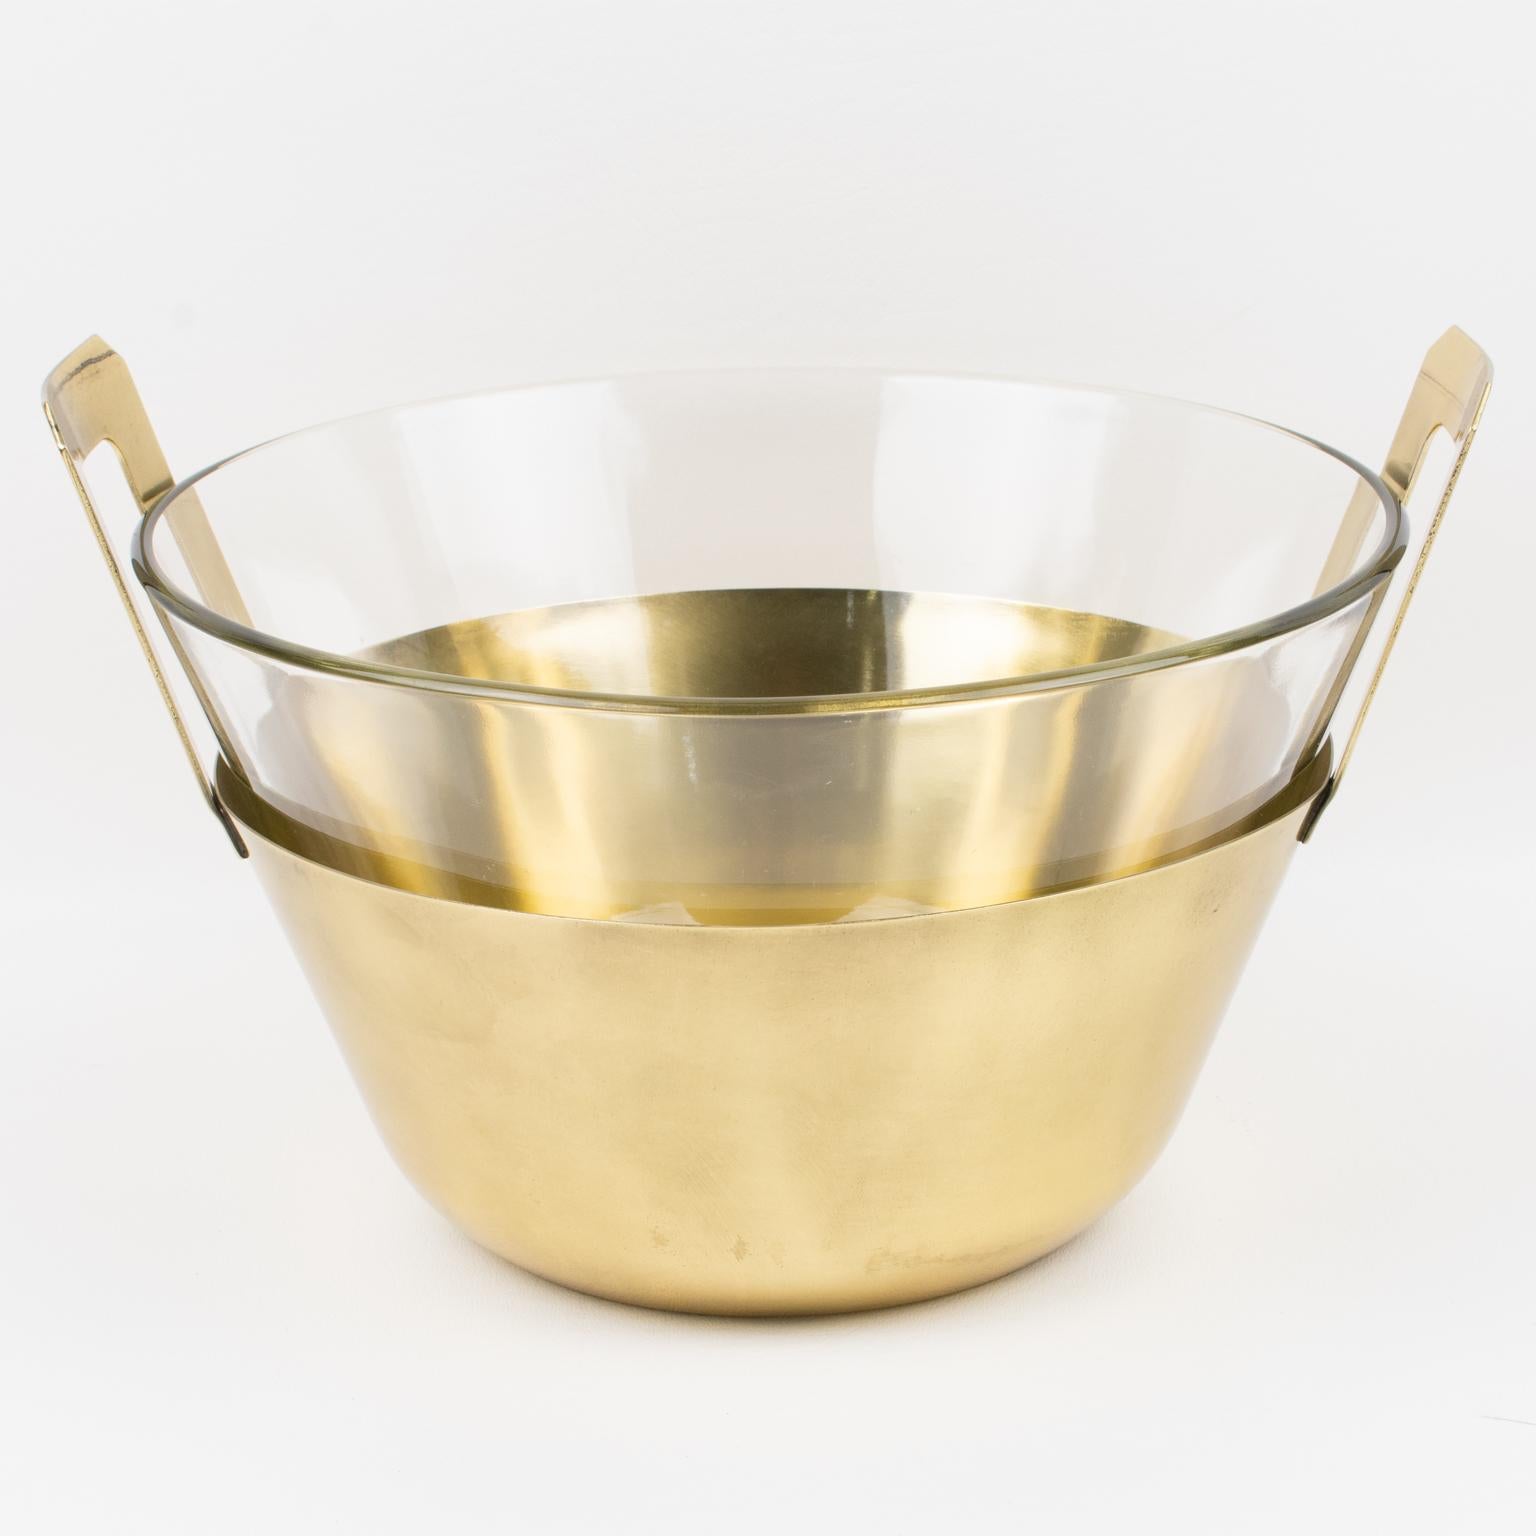 Modernist Gilt Metal and Glass Decorative Bowl Centerpiece, 1980s For Sale 5